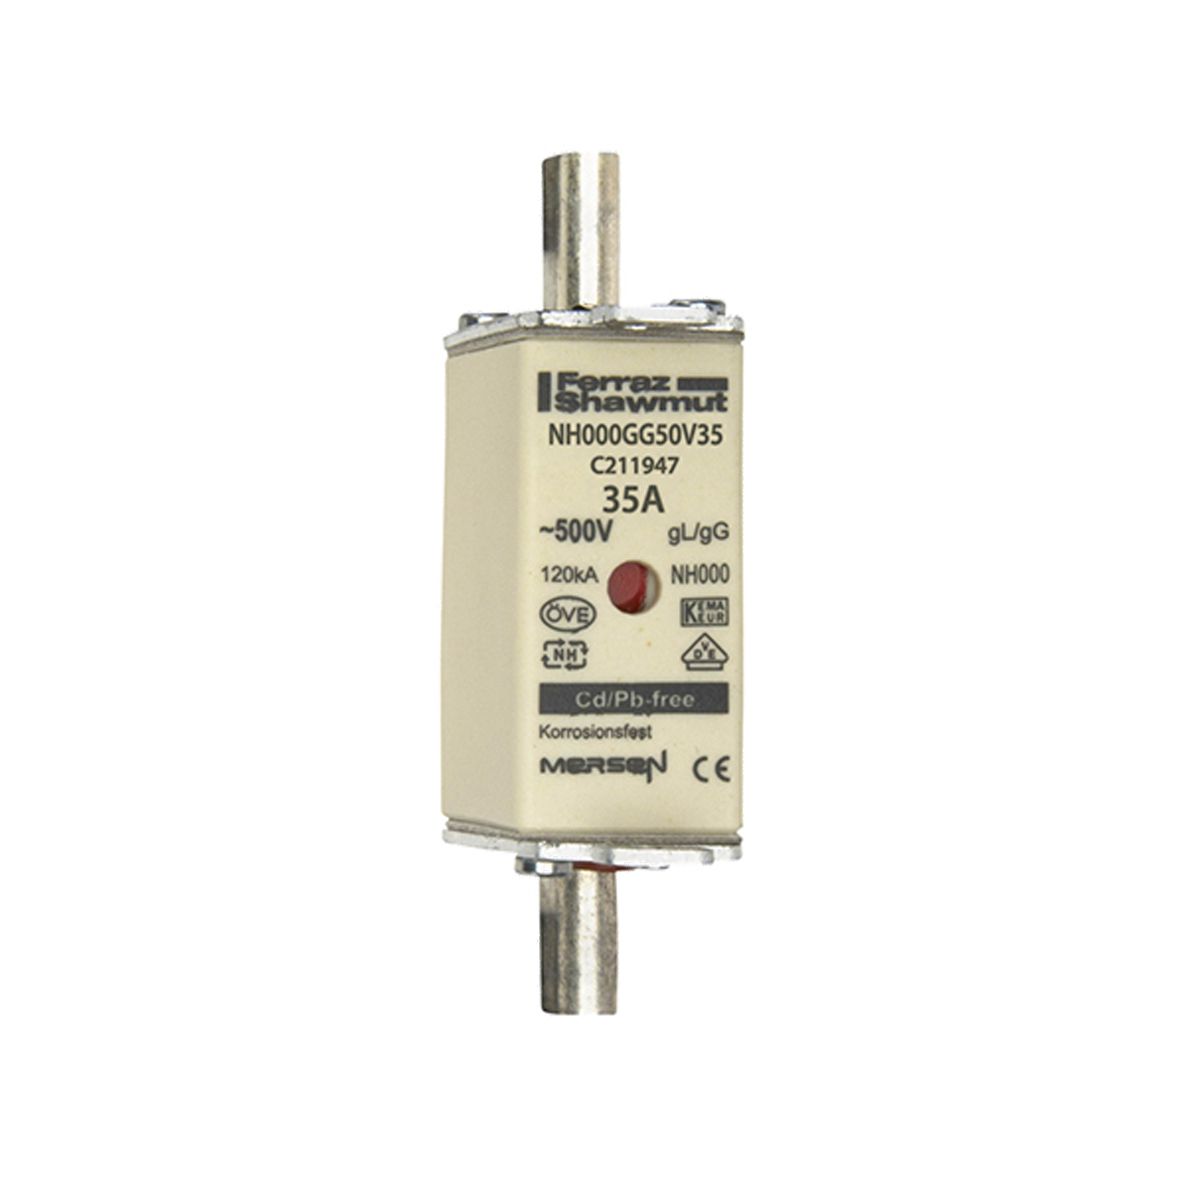 C211947 - NH fuse-link gG, 500VAC, size 000, 35A double indicator/live tags